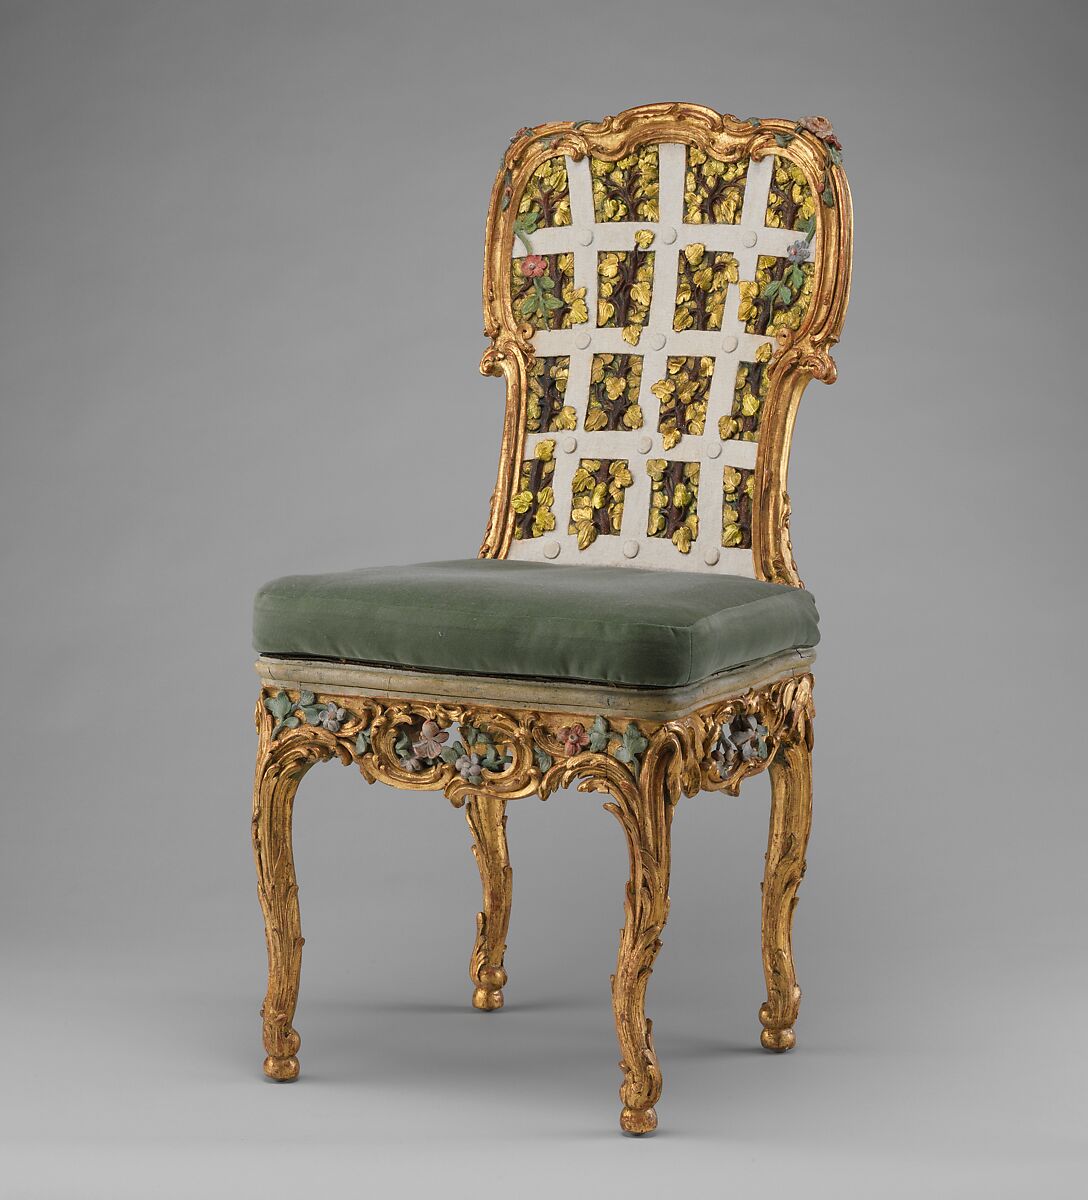 Side chair (one of four) (part of a set), Johann Michael Bauer  German (born Westheim), Carved, painted and gilded limewood; squab pillow in silk velvet (not original), German, Würzburg